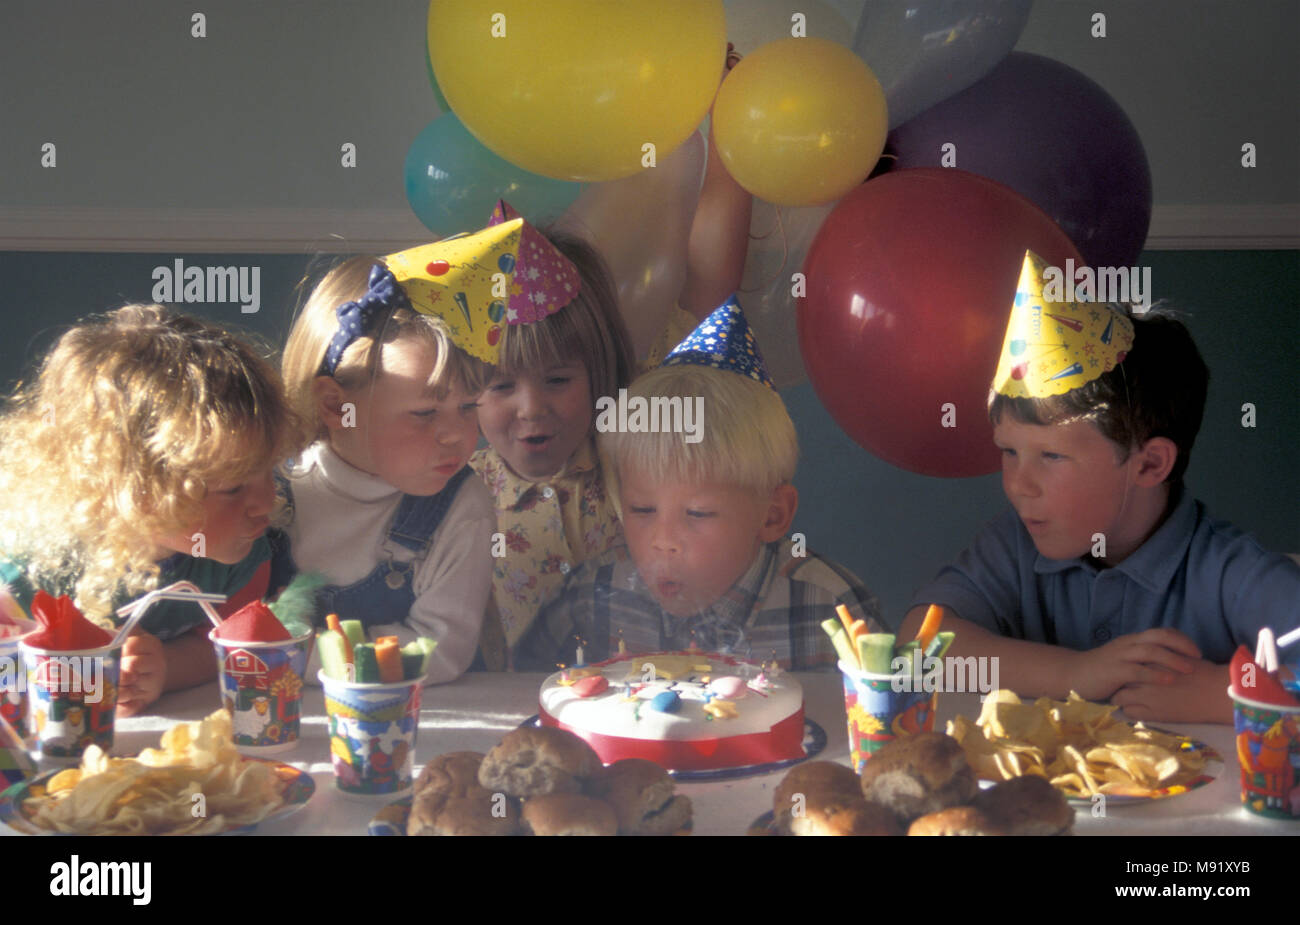 A childrens' birthday party blowing out the candles Stock Photo